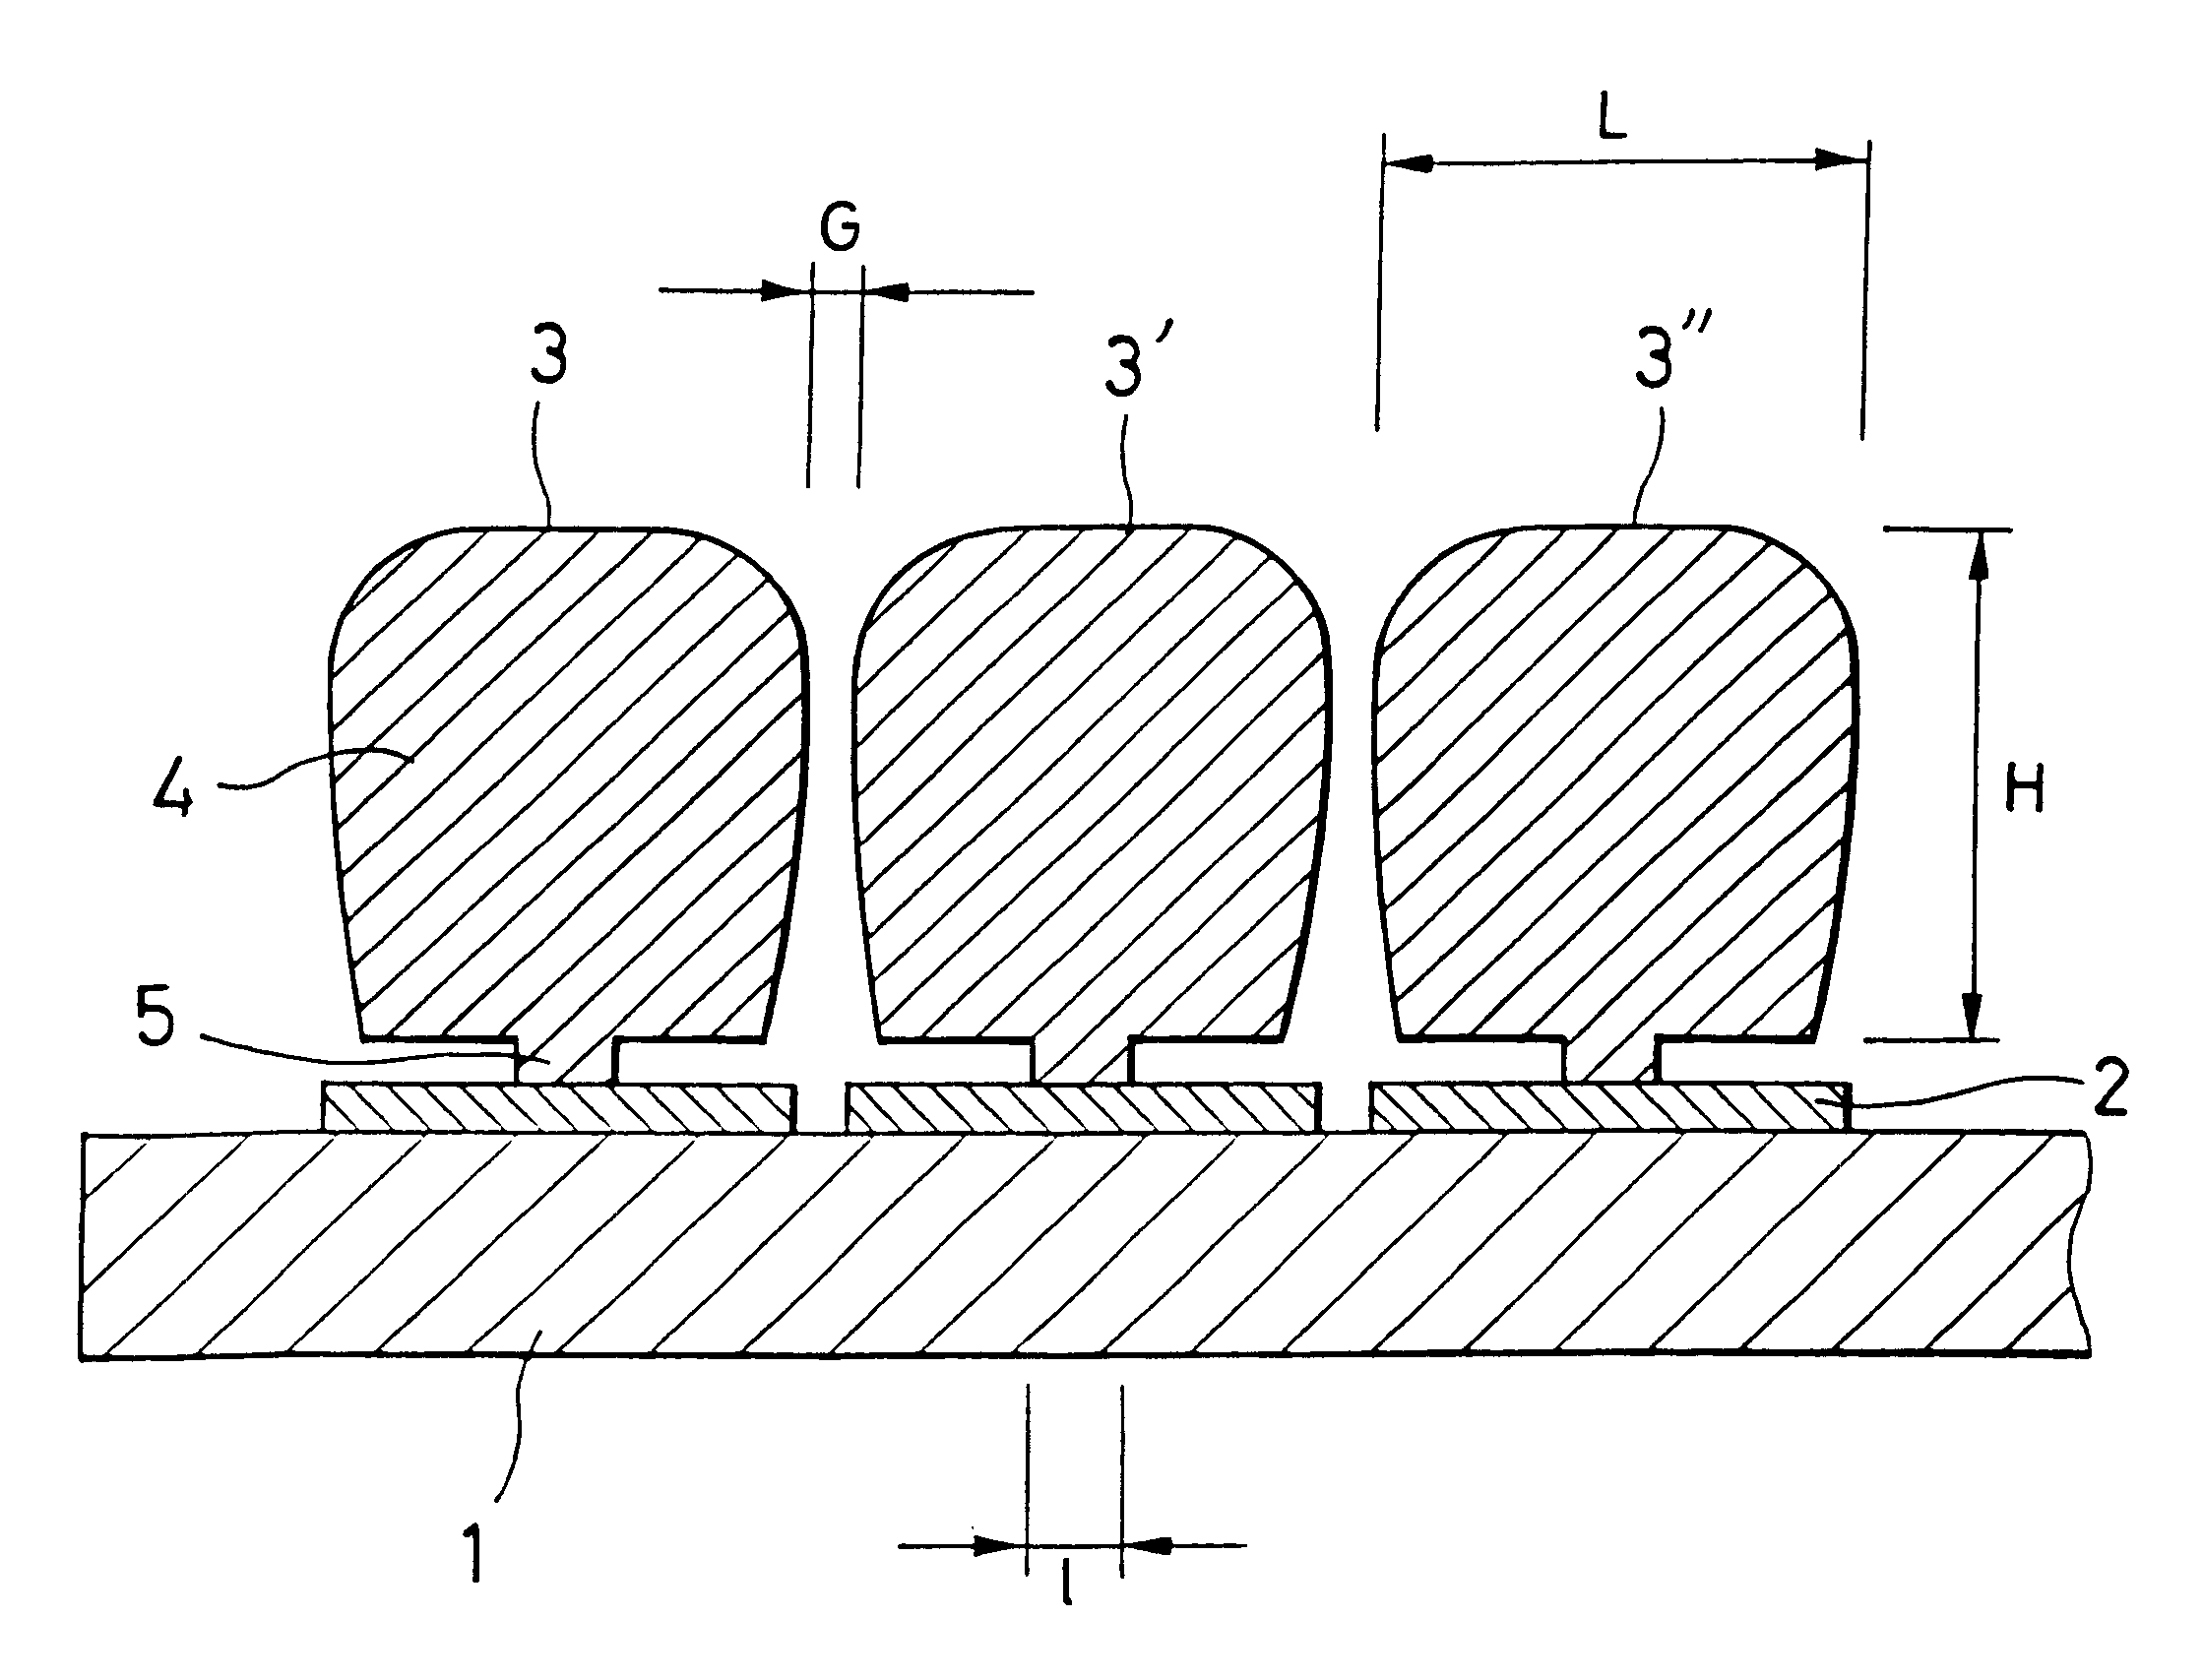 Planar coil and planar transformer, and process of fabricating a high-aspect conductive device